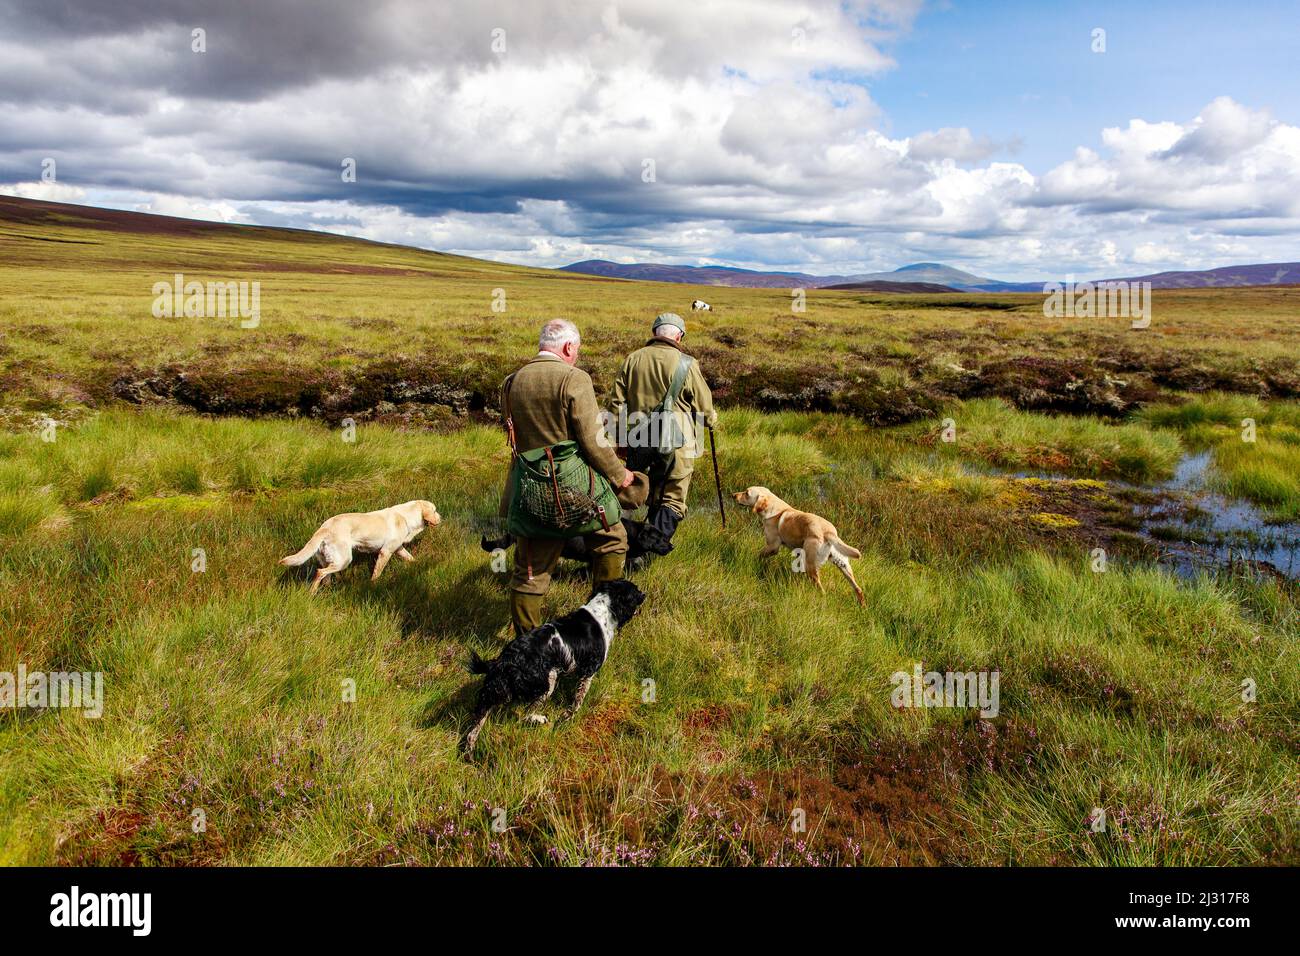 Grouse hunting, pickers collecting grouse with hunting dog, retriever, Highlands, Royal Deeside, Aberdeenshire, Scotland, UK Stock Photo